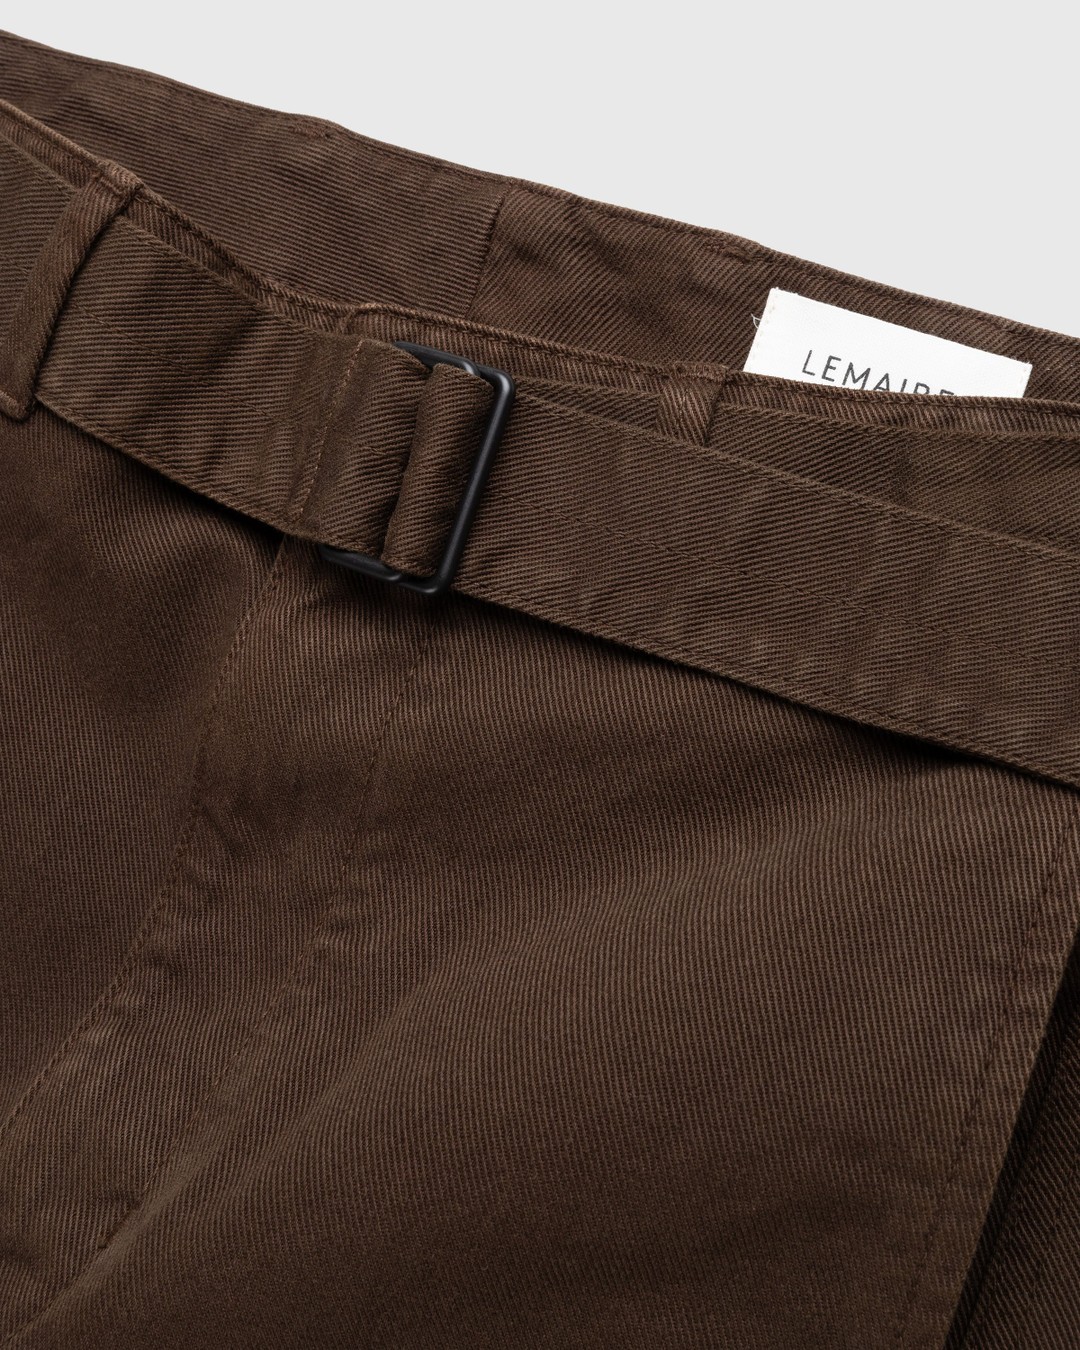 Lemaire – Twisted Belted Casual Pant - Pants - Brown - Image 5